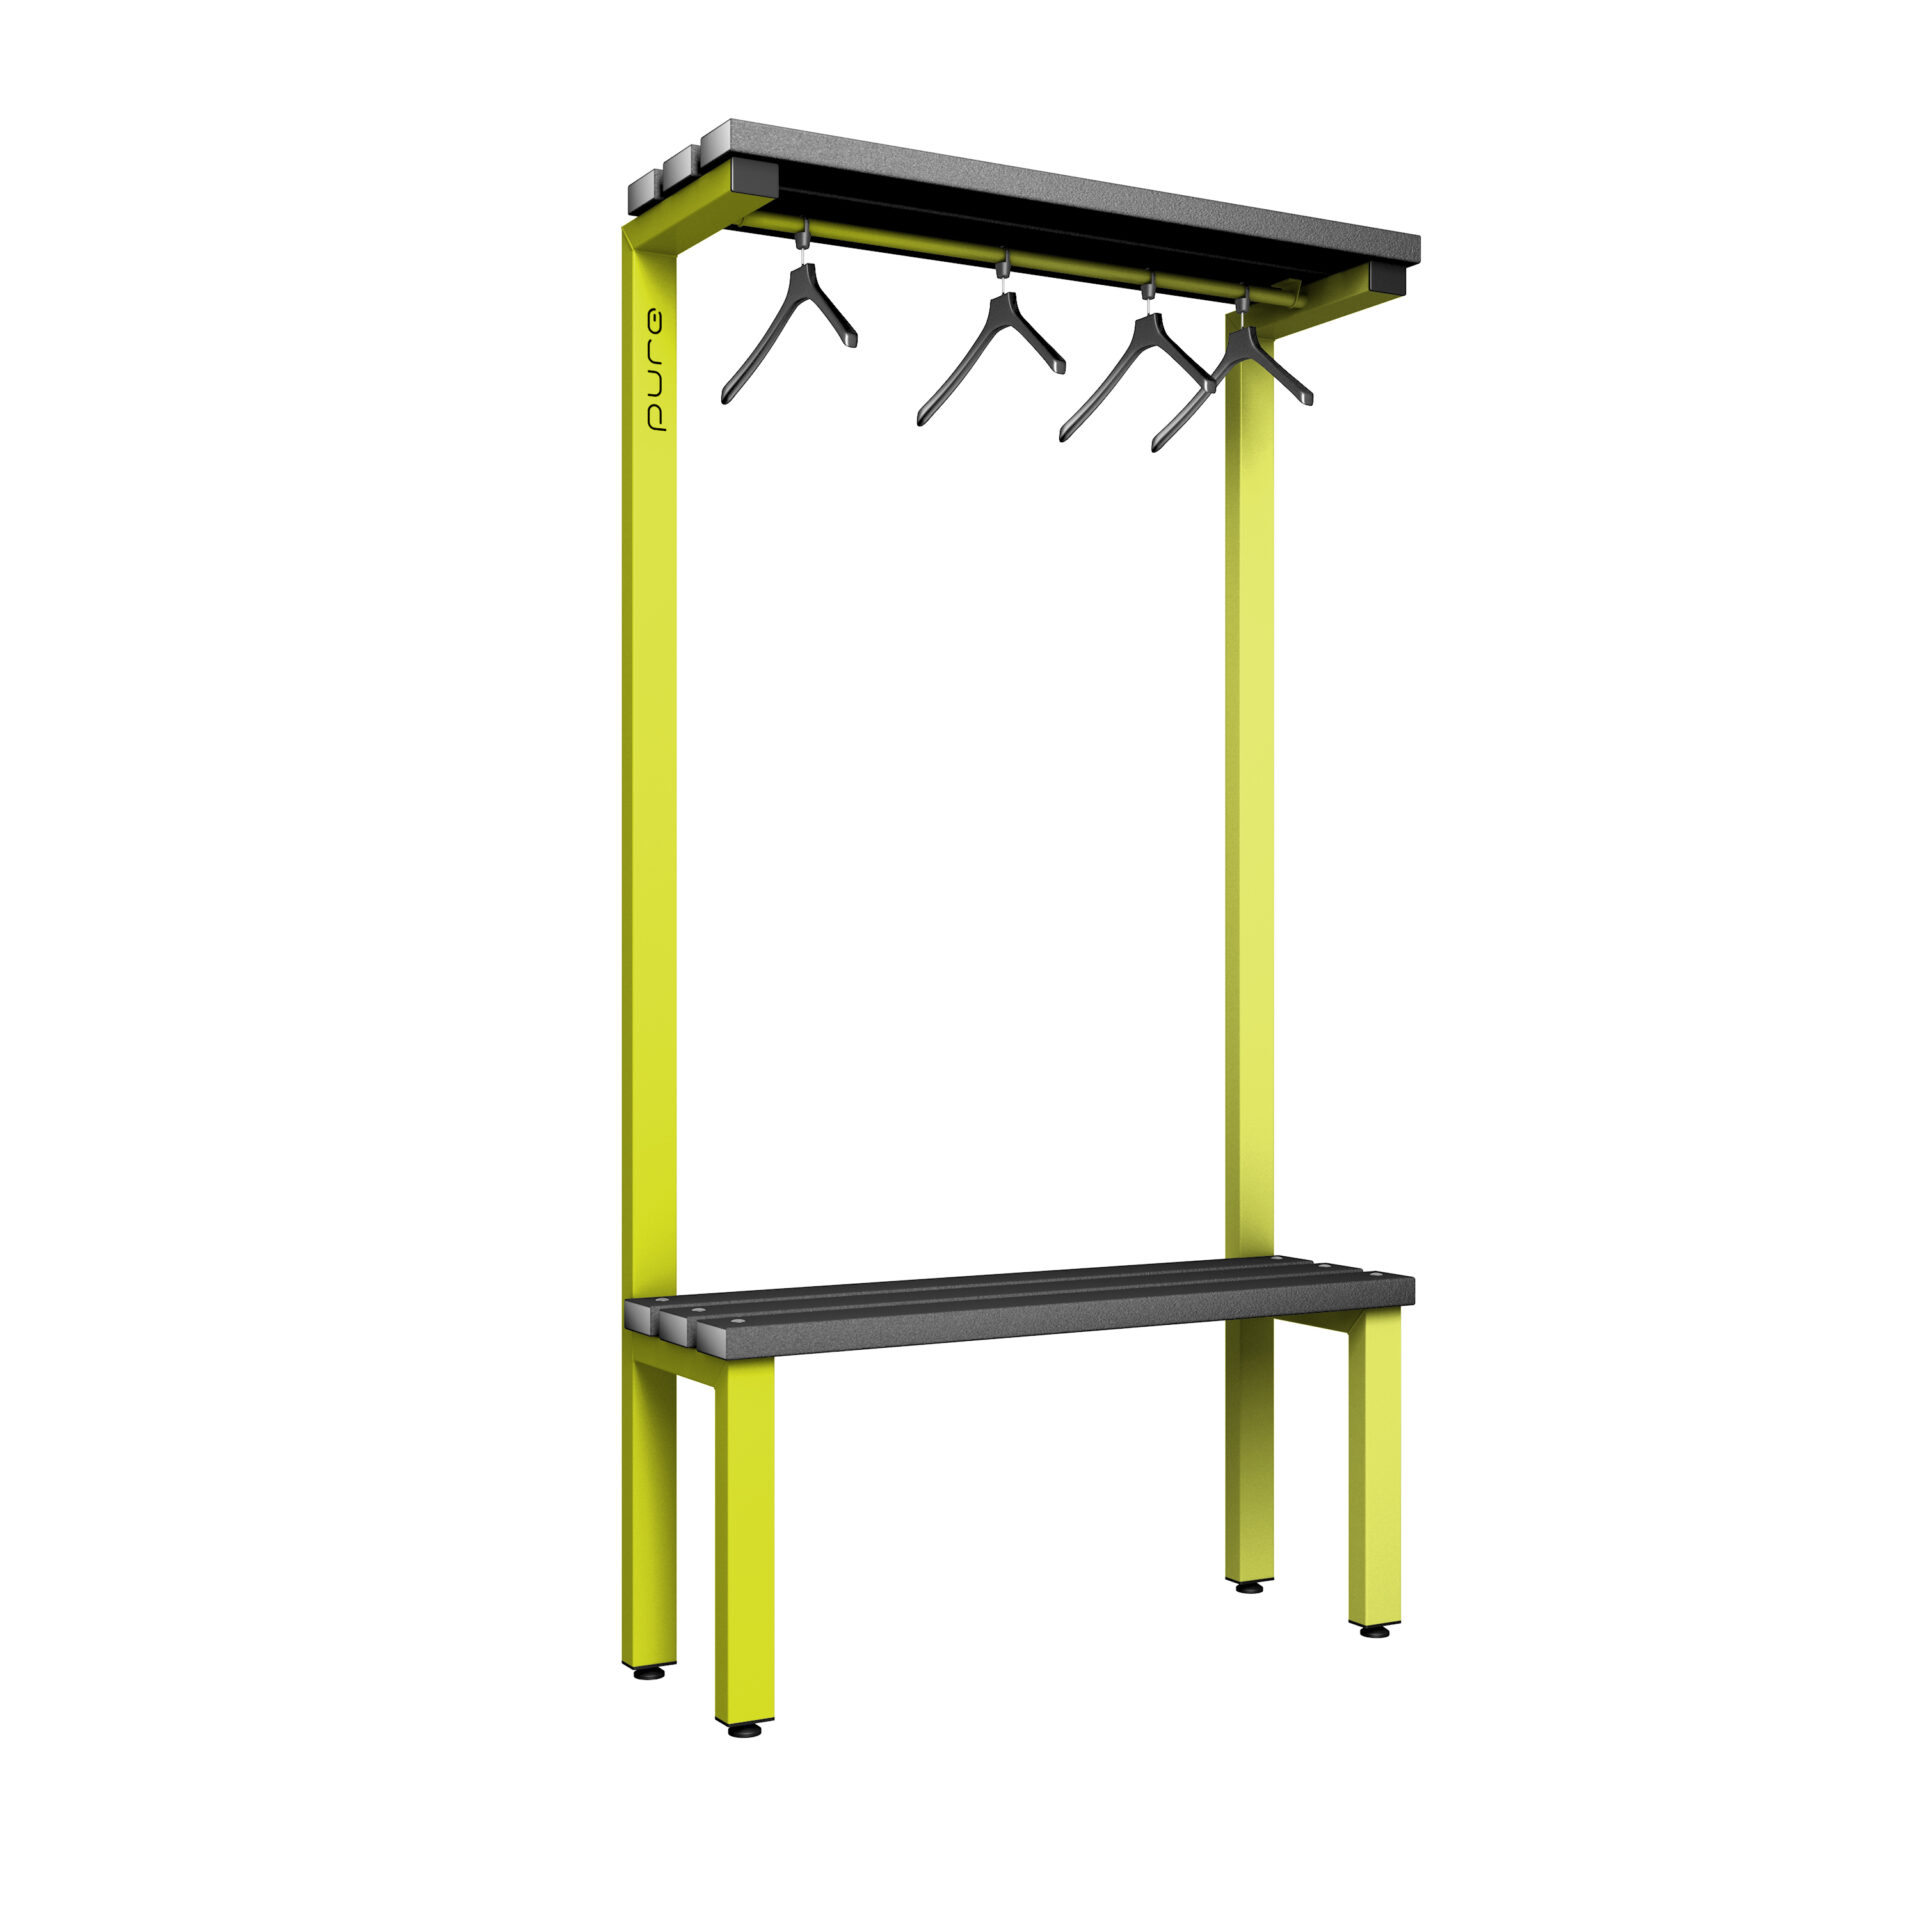 Pure Carbon Zero Single Sided 1000mm Overhead Hanging Bench